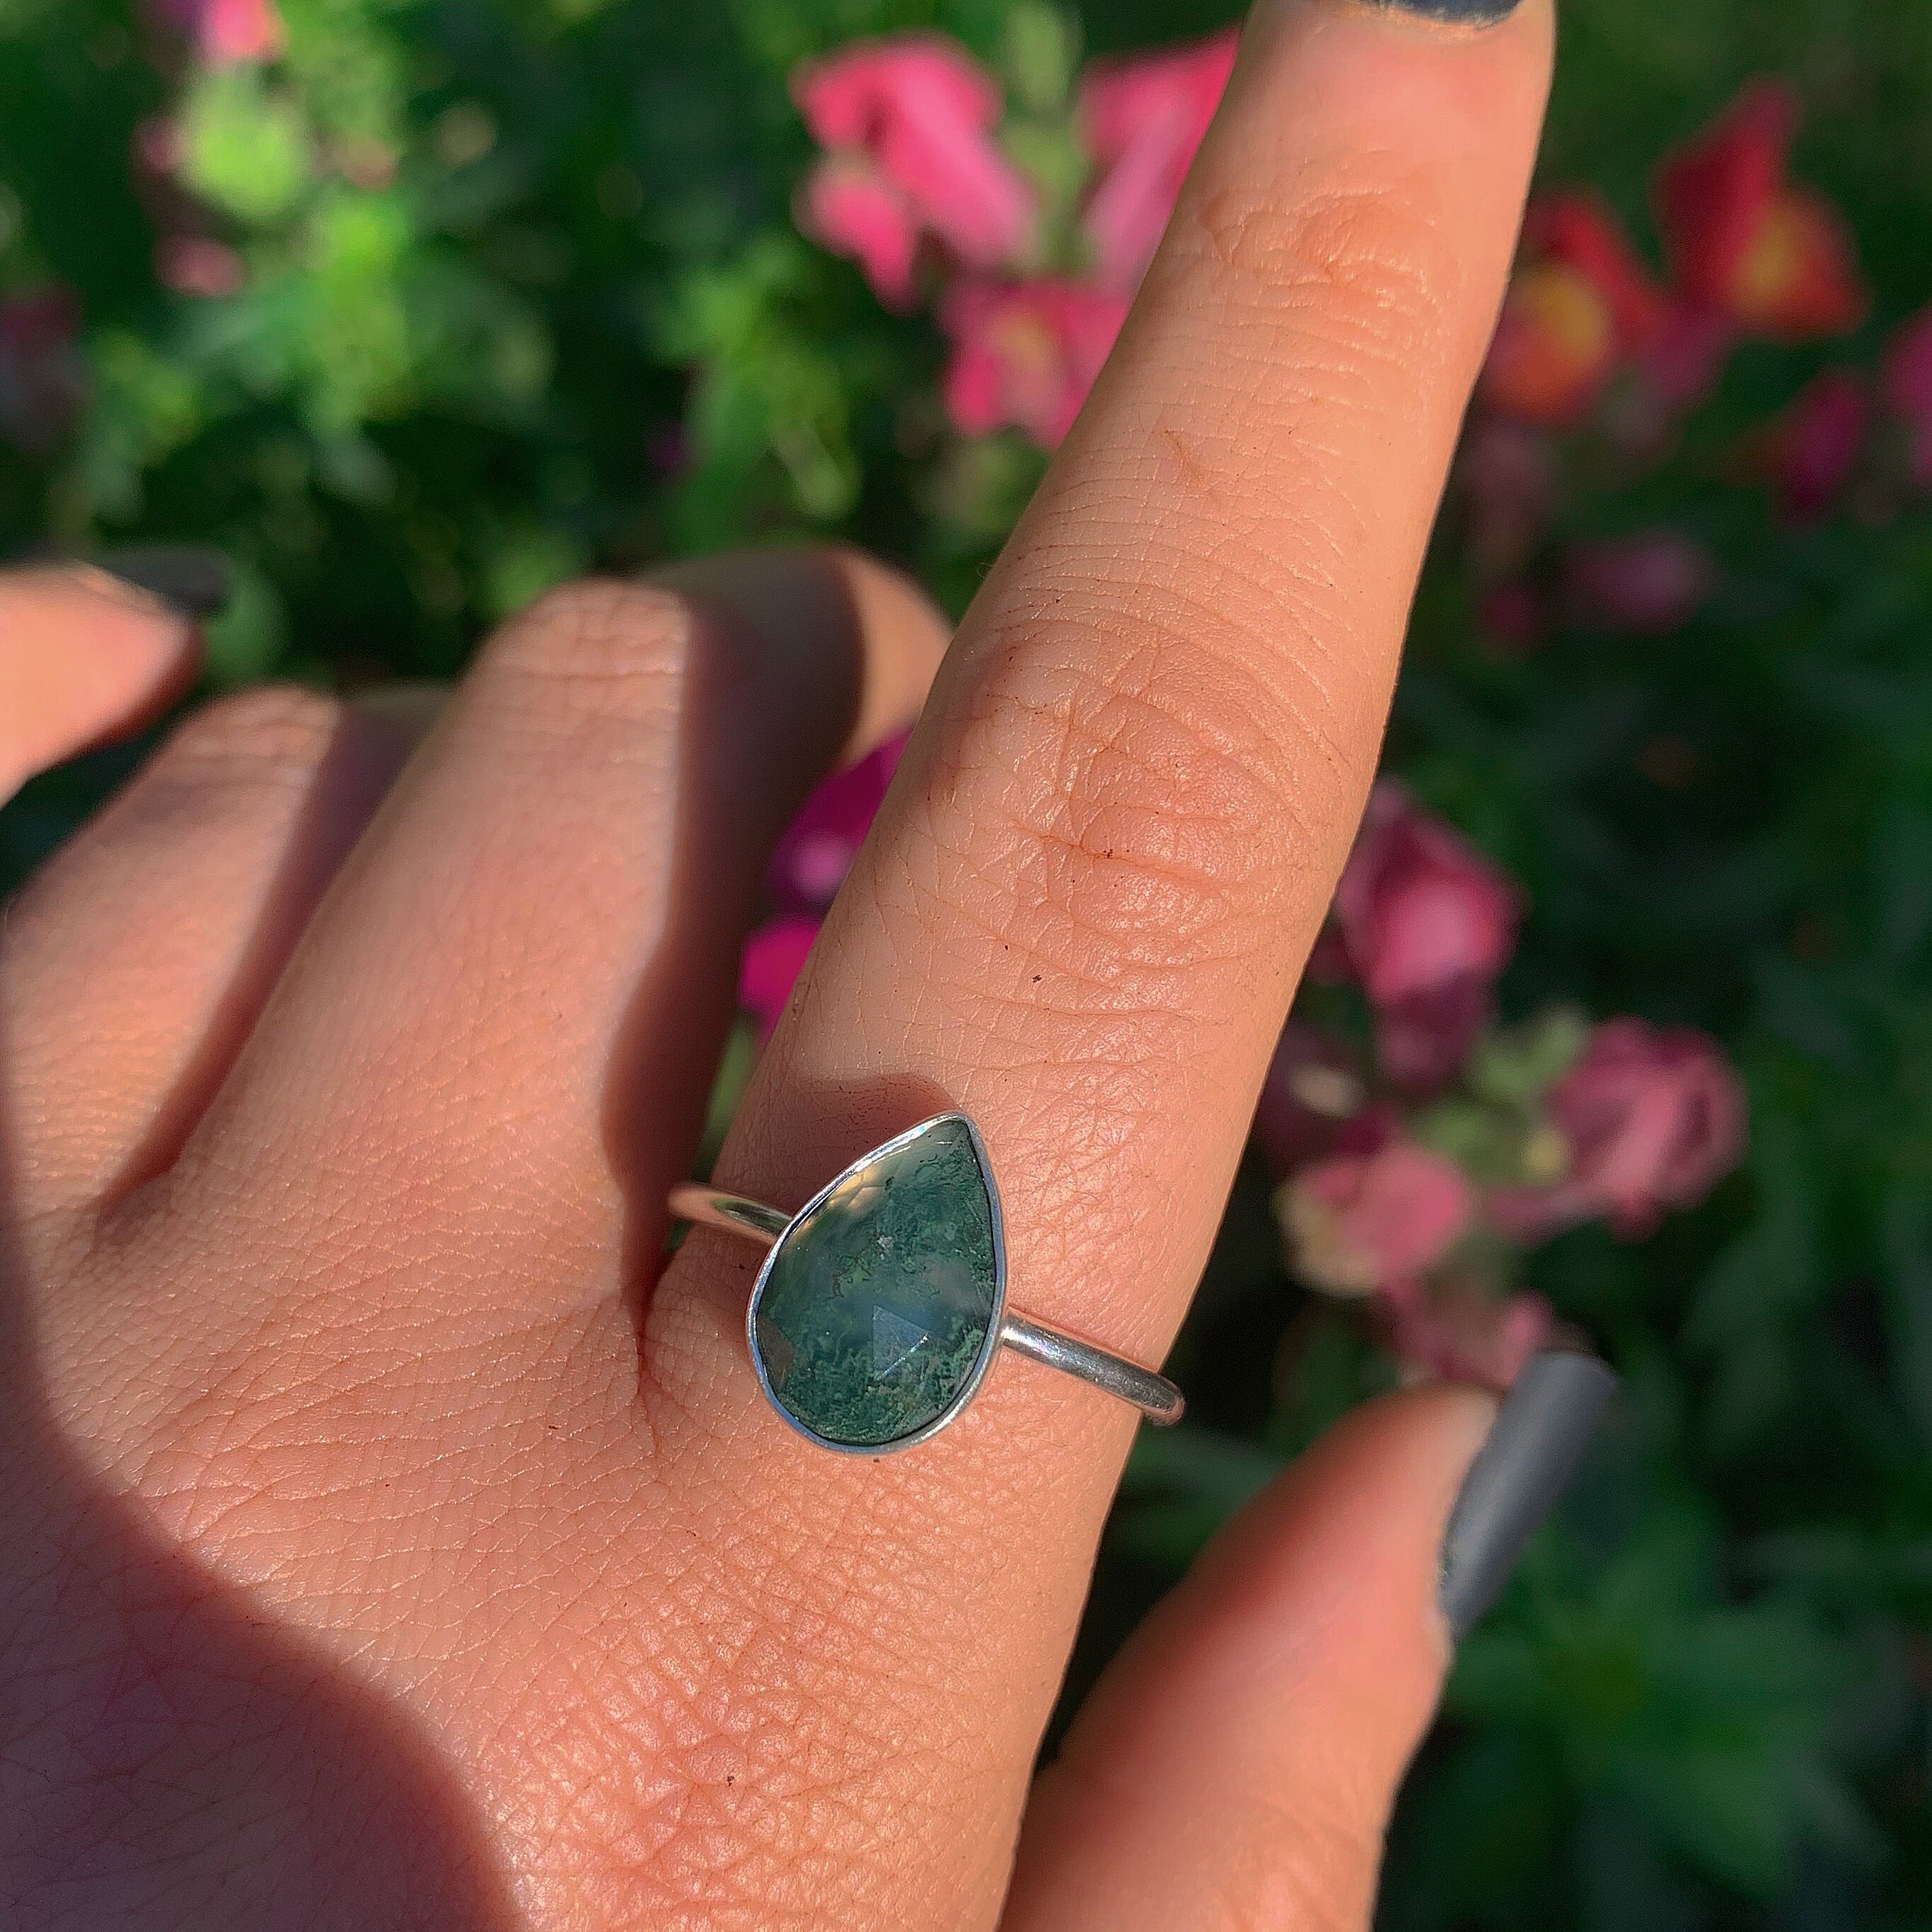 Rose Cut Moss Agate Ring - Size 10 - Sterling Silver - Dainty Moss Agate Jewelry - Faceted Stone Ring - Leaf Ring - Teardrop Tree Agate OOAK